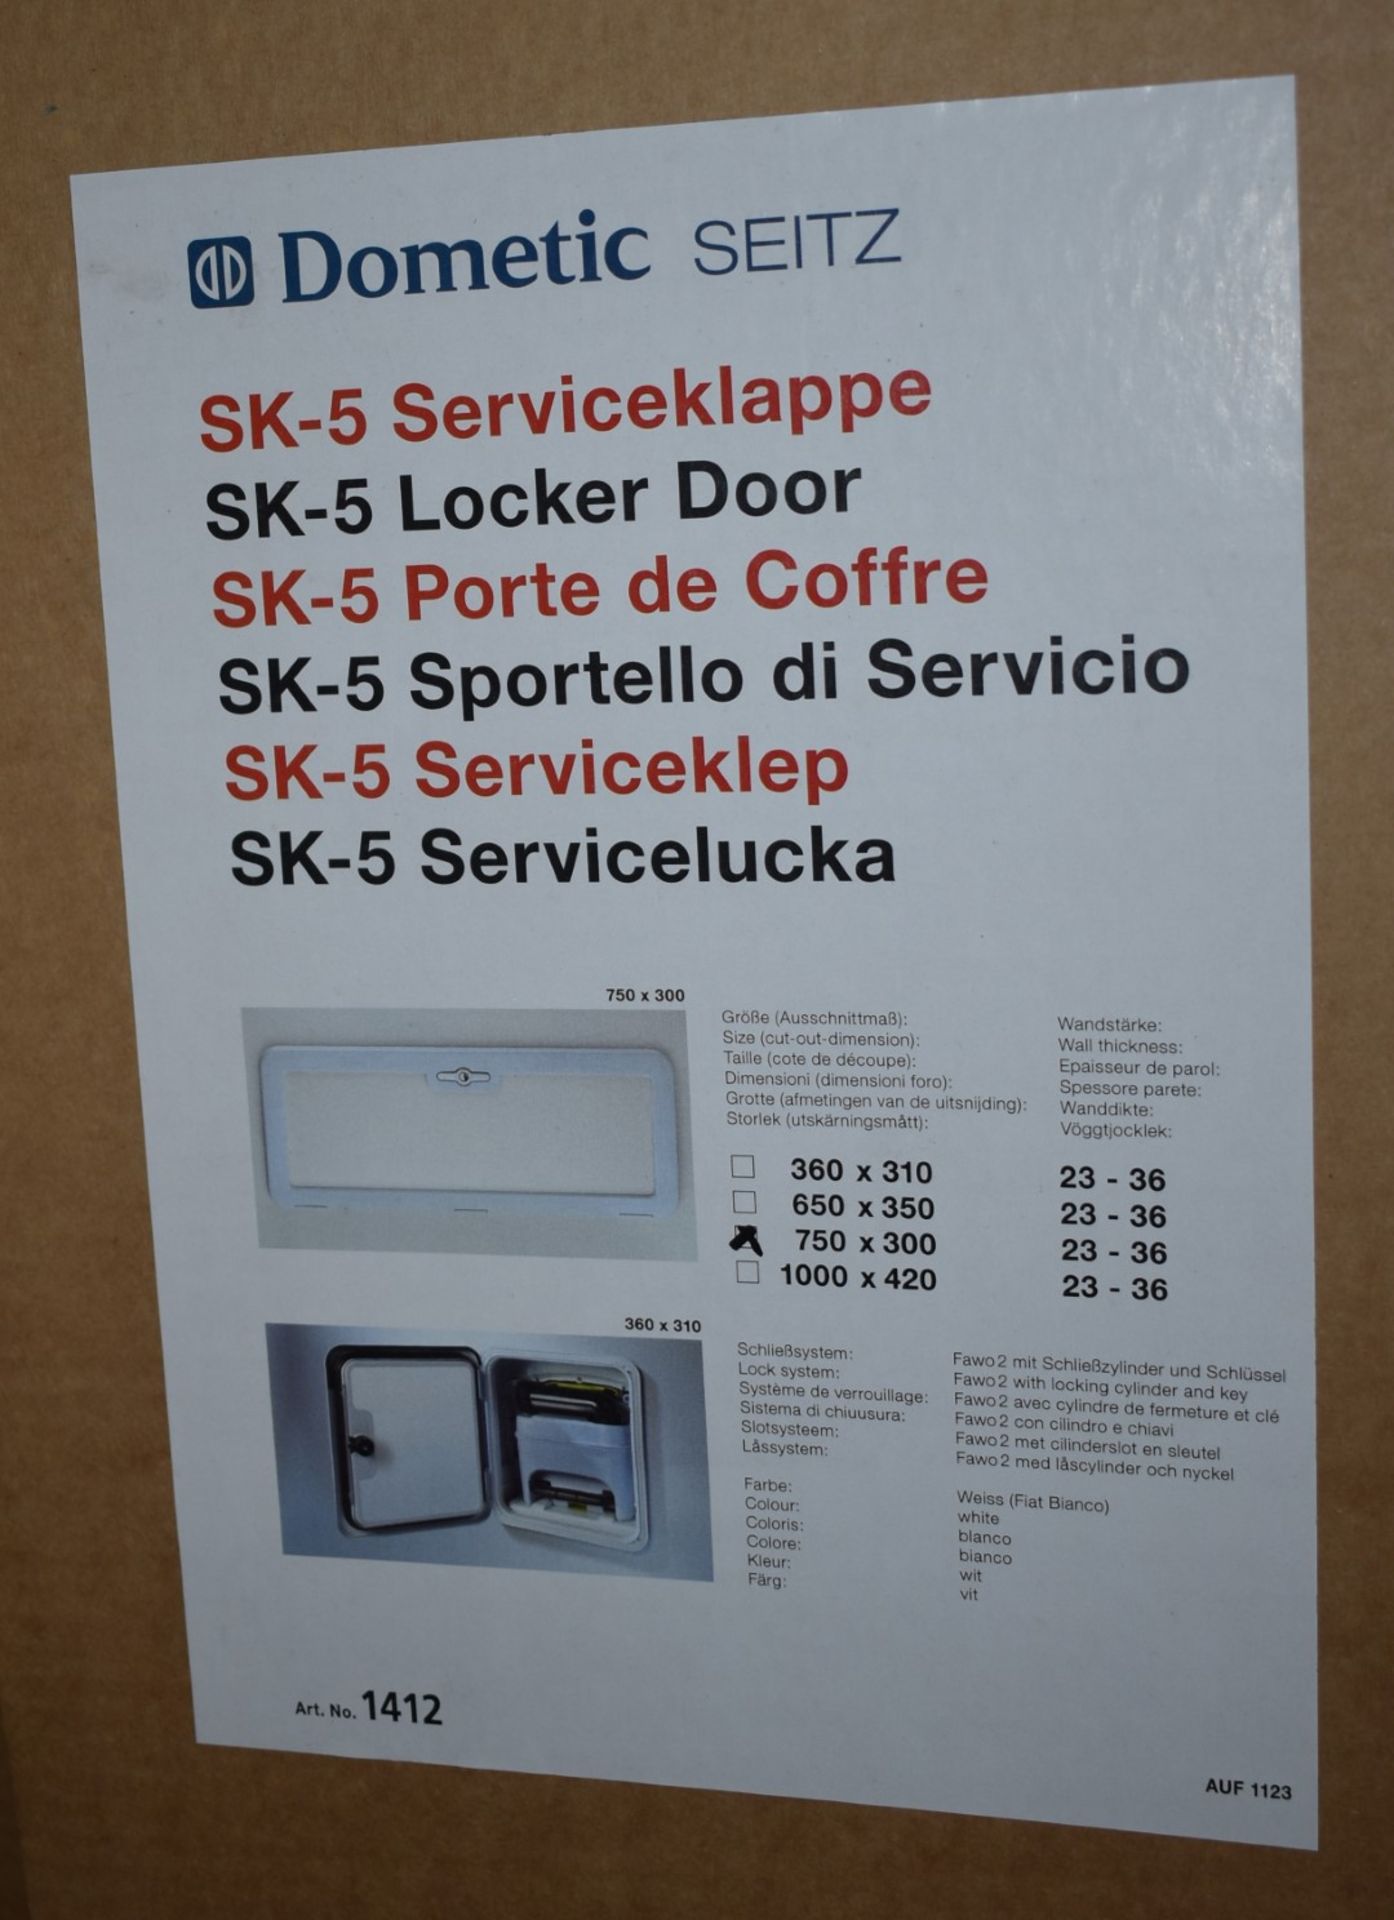 3 x Dometic SK5 Service Hatches For Caravans or Campervans - 300 x 750mm - New Boxed Stock - Ref 411 - Image 4 of 5